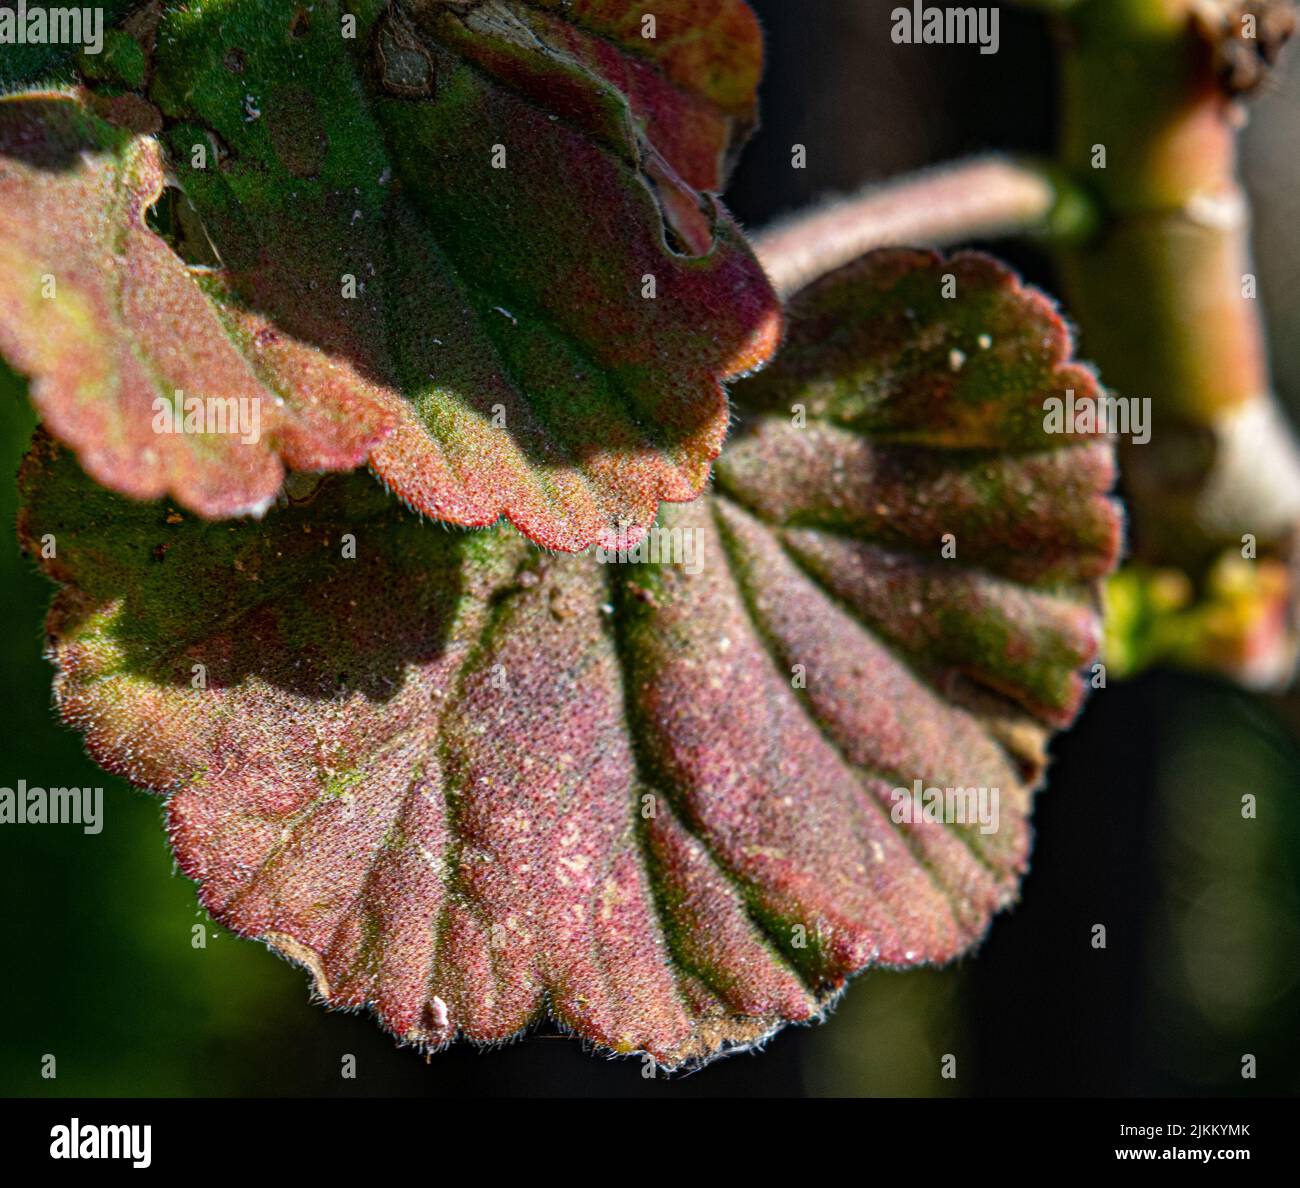 A macro shot of a beautiful green reddish rex Begonia leaves growing in the garden under sunlight Stock Photo